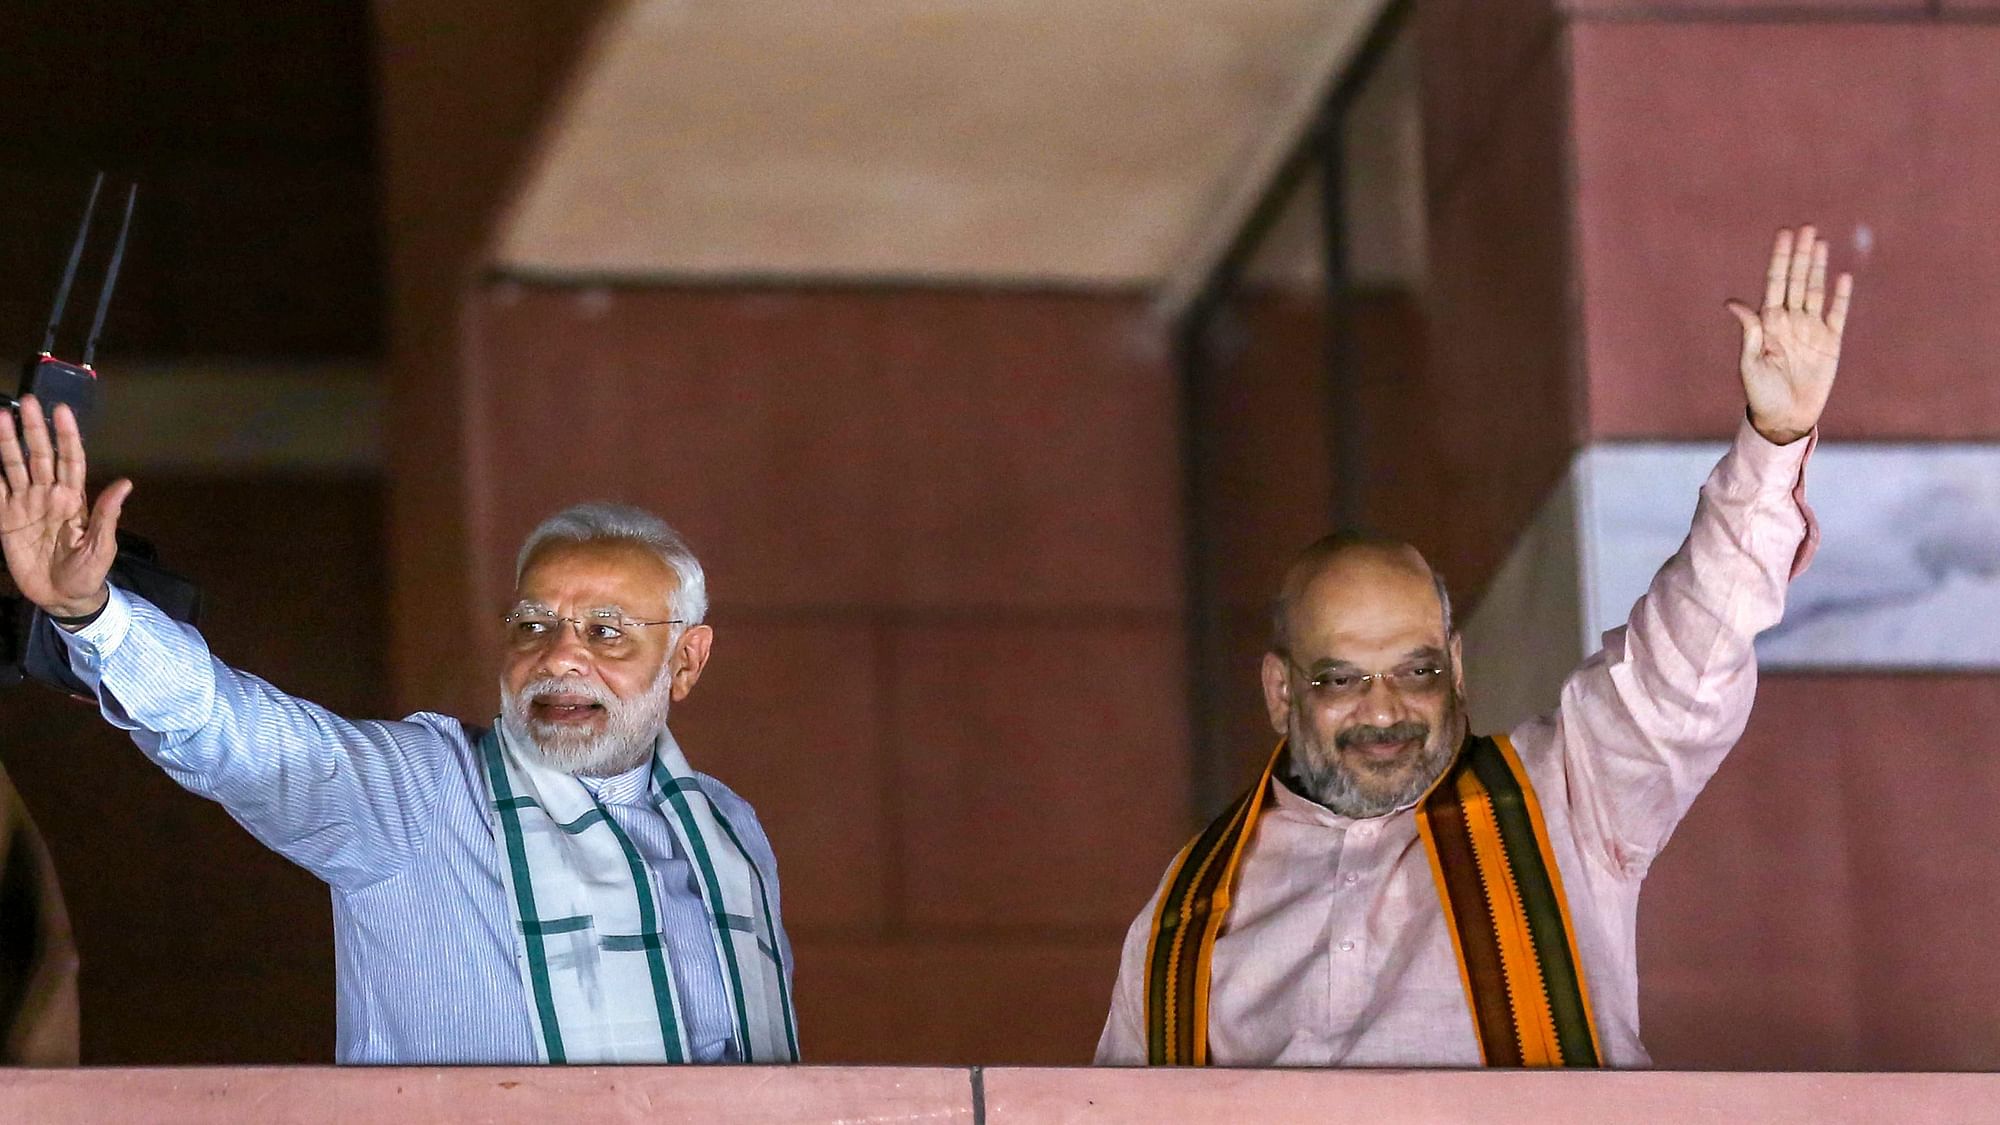 Prime Minister Narendra Modi and BJP president Amit Shah will address about 10 lakh BJP workers in Bhopal to commence the campaign in Madhya Pradesh.